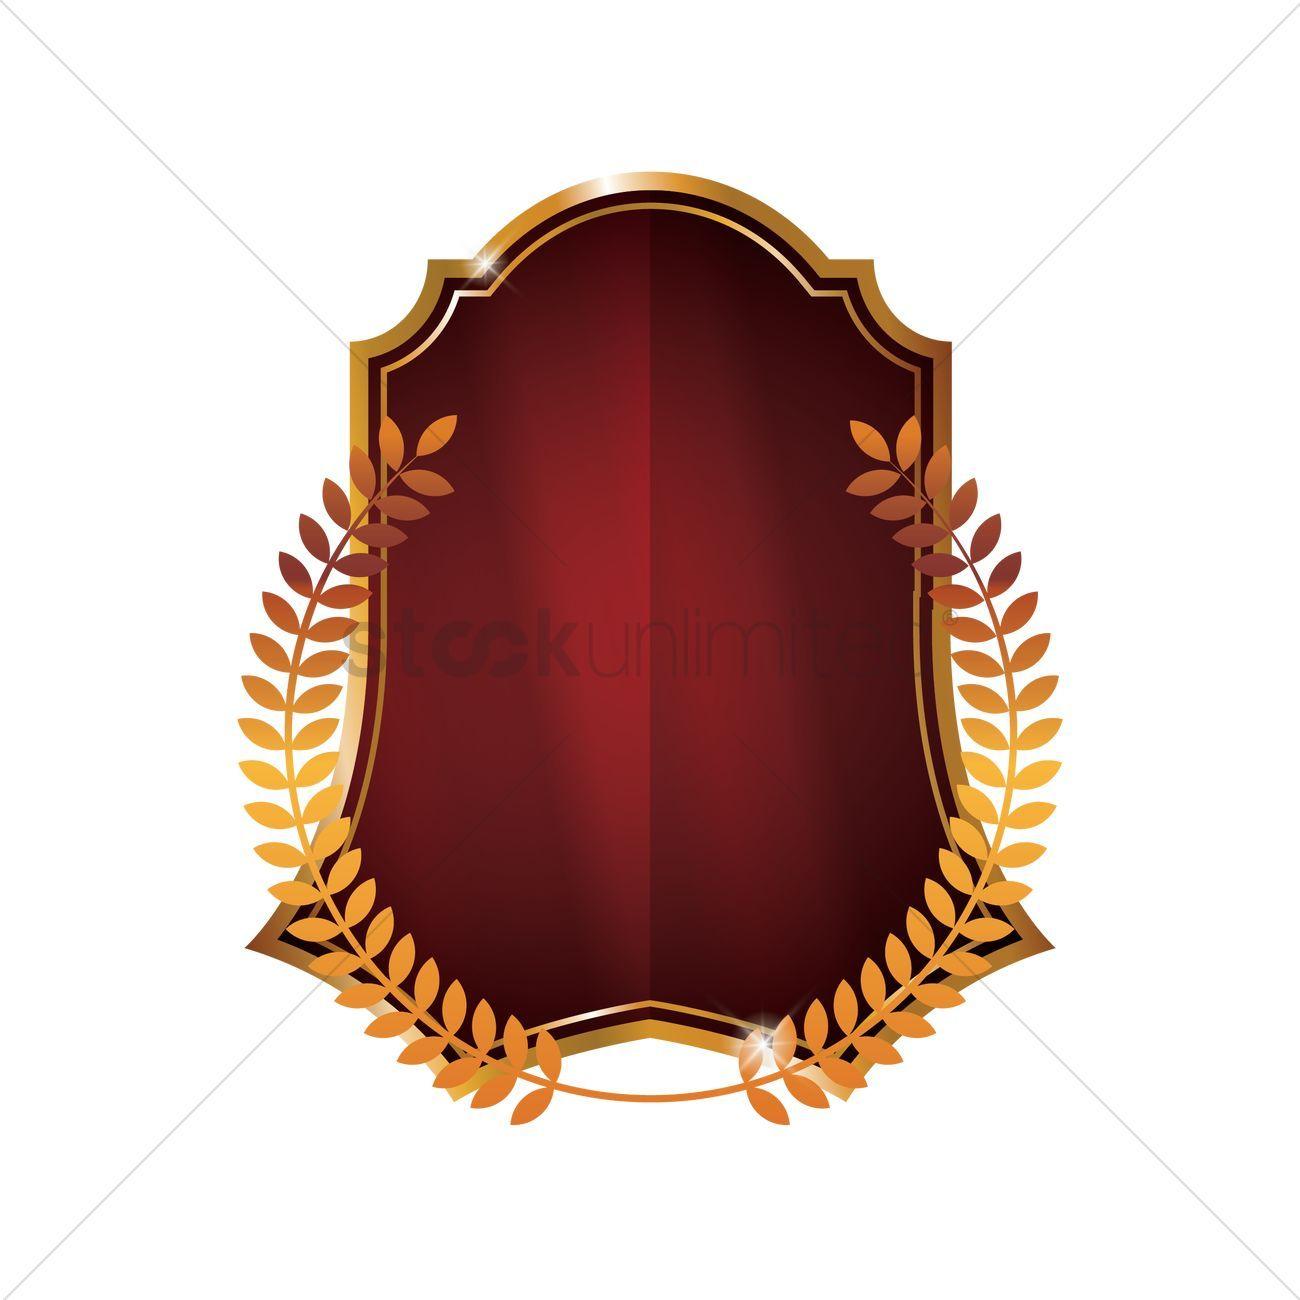 Red Gold Shield Logo - Red shield emblem Vector Image - 1874321 | StockUnlimited